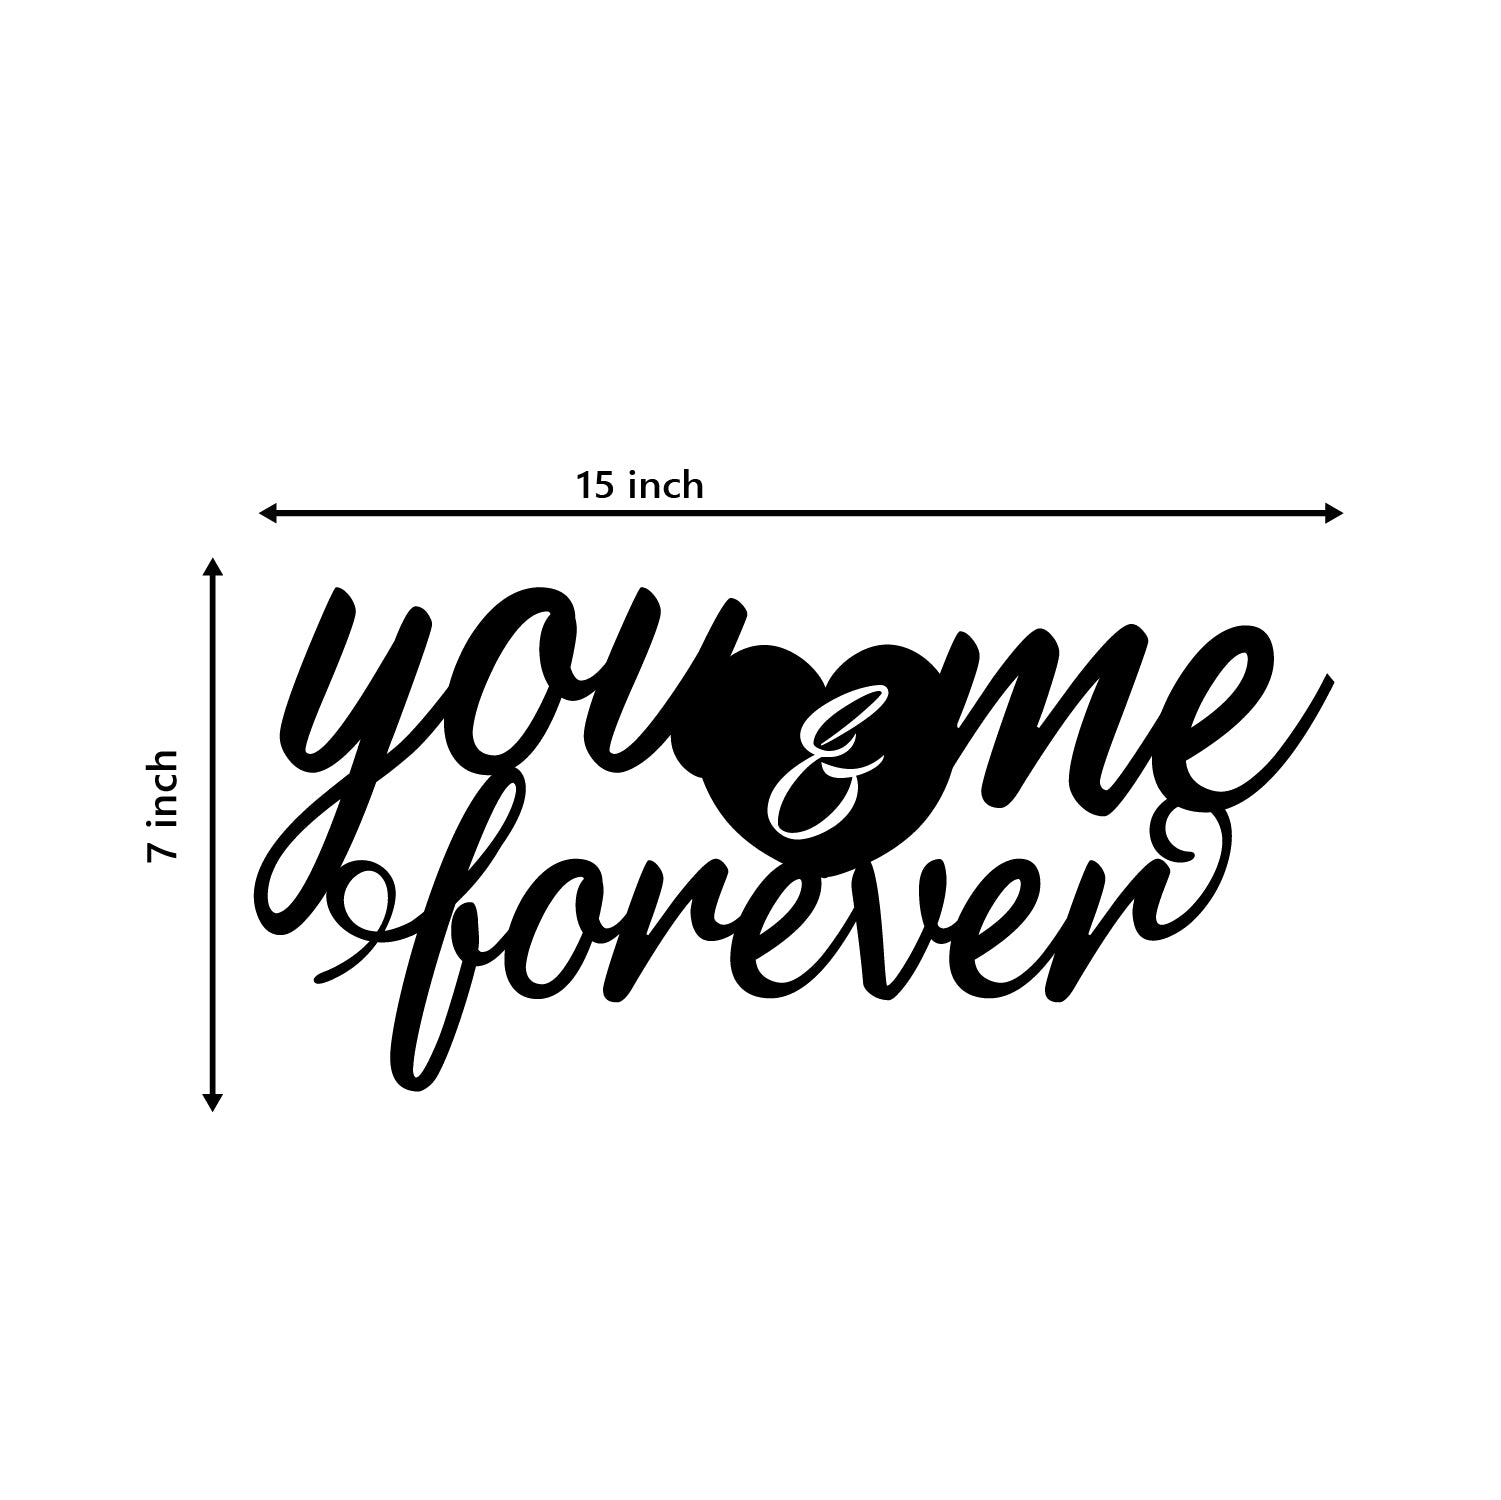 "You & Me Forever" Love Theme Black Engineered Wood Wall Art Cutout, Ready to Hang Home Decor 3